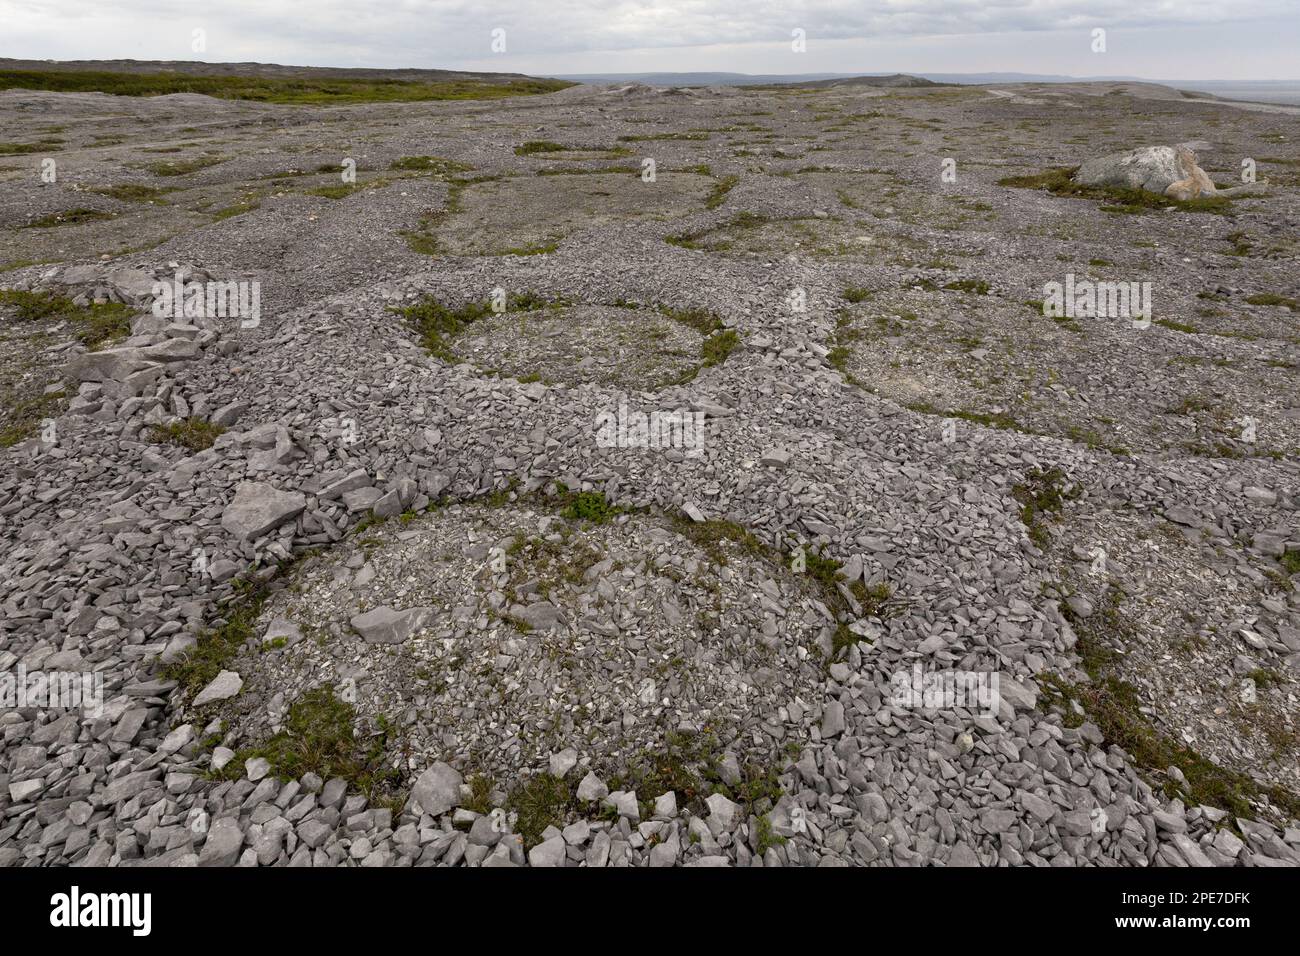 Frost polygons and other permafrost effects on Ordovician limestone, Burnt Cape Ecological Reserve, Raleigh, Great Northern Peninsula, Newfoundland Stock Photo